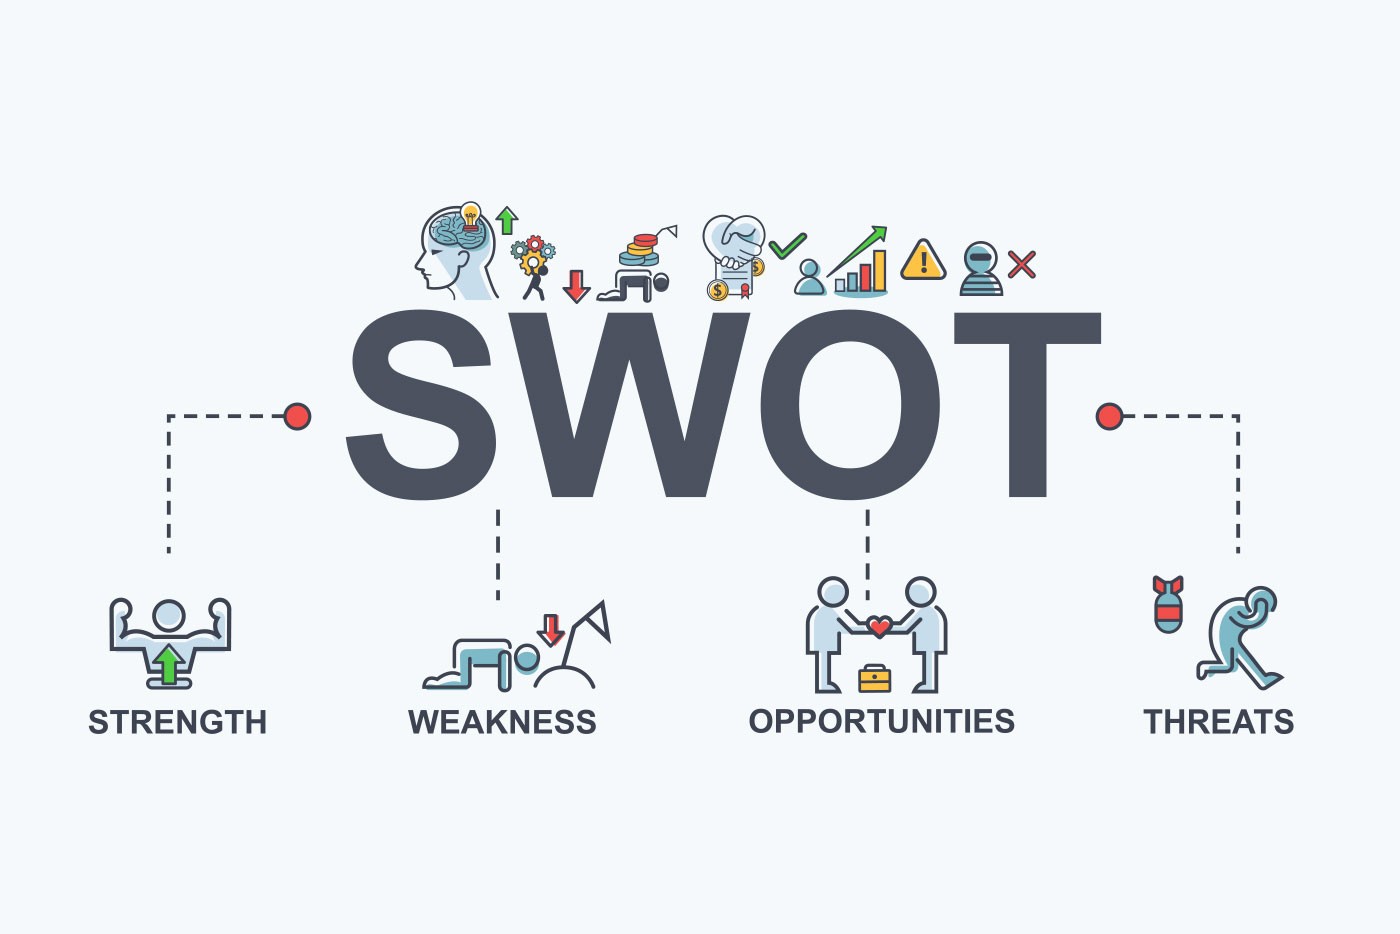 How to do a SWOT analysis